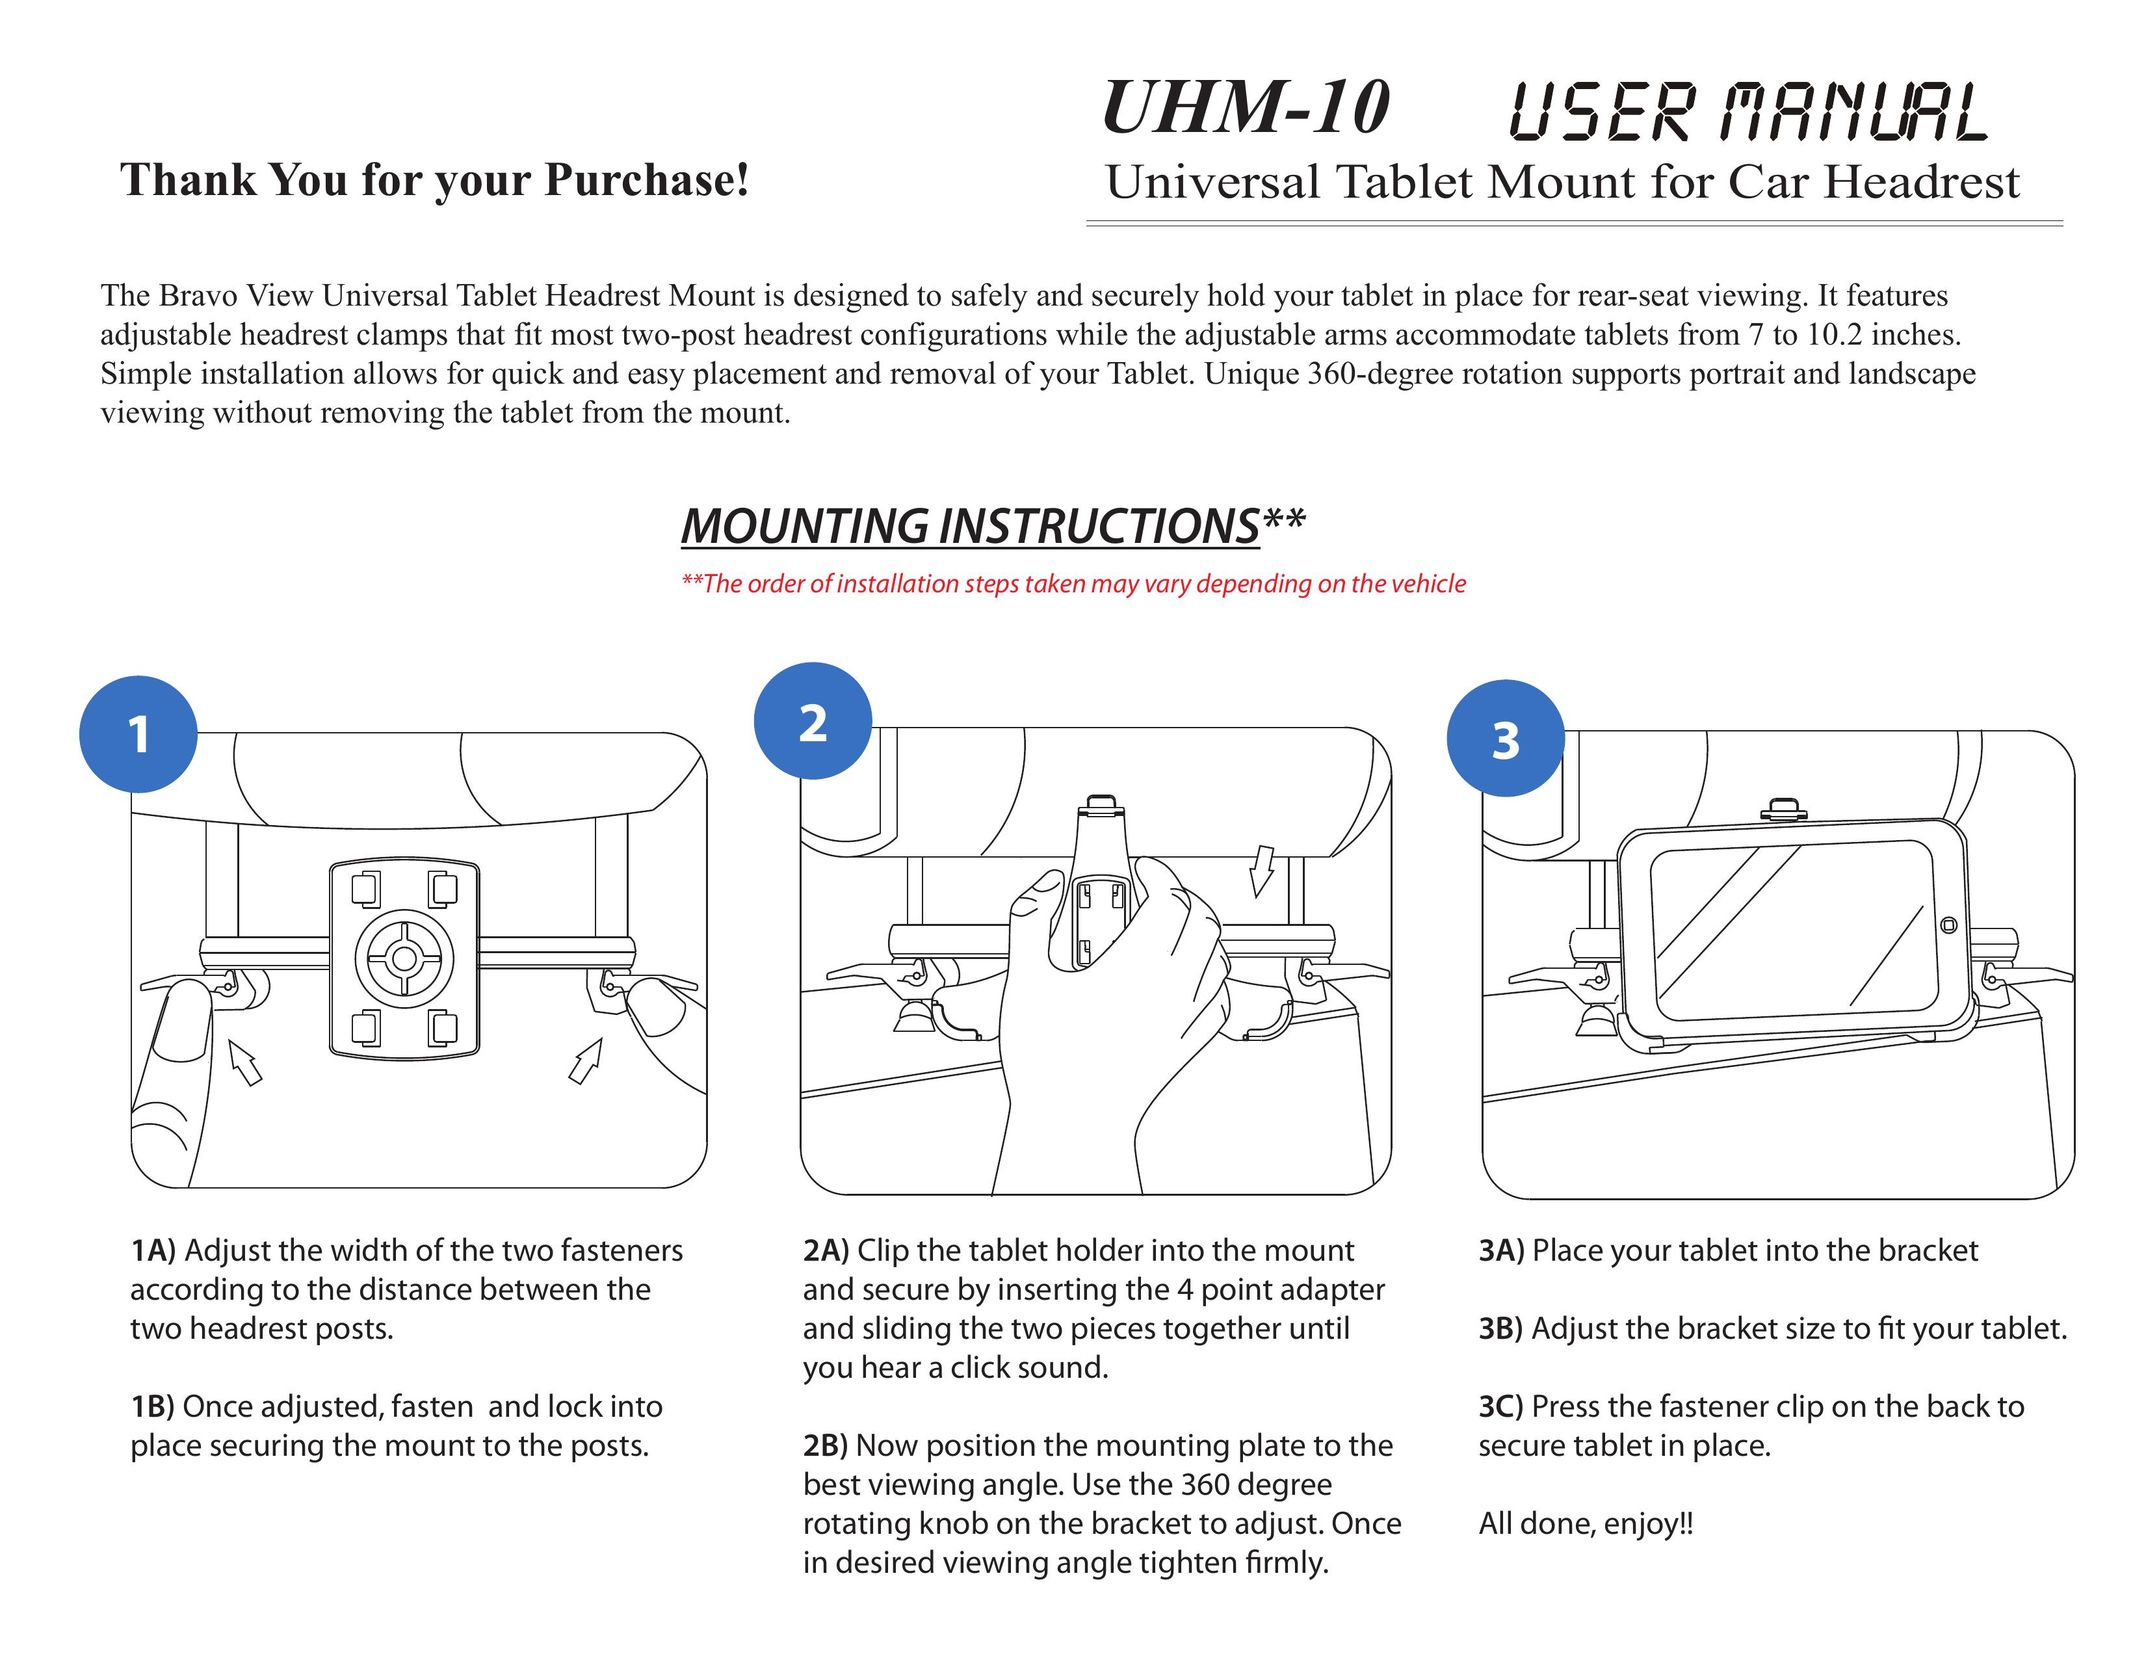 Bravo View UHM10 Tablet Accessory User Manual